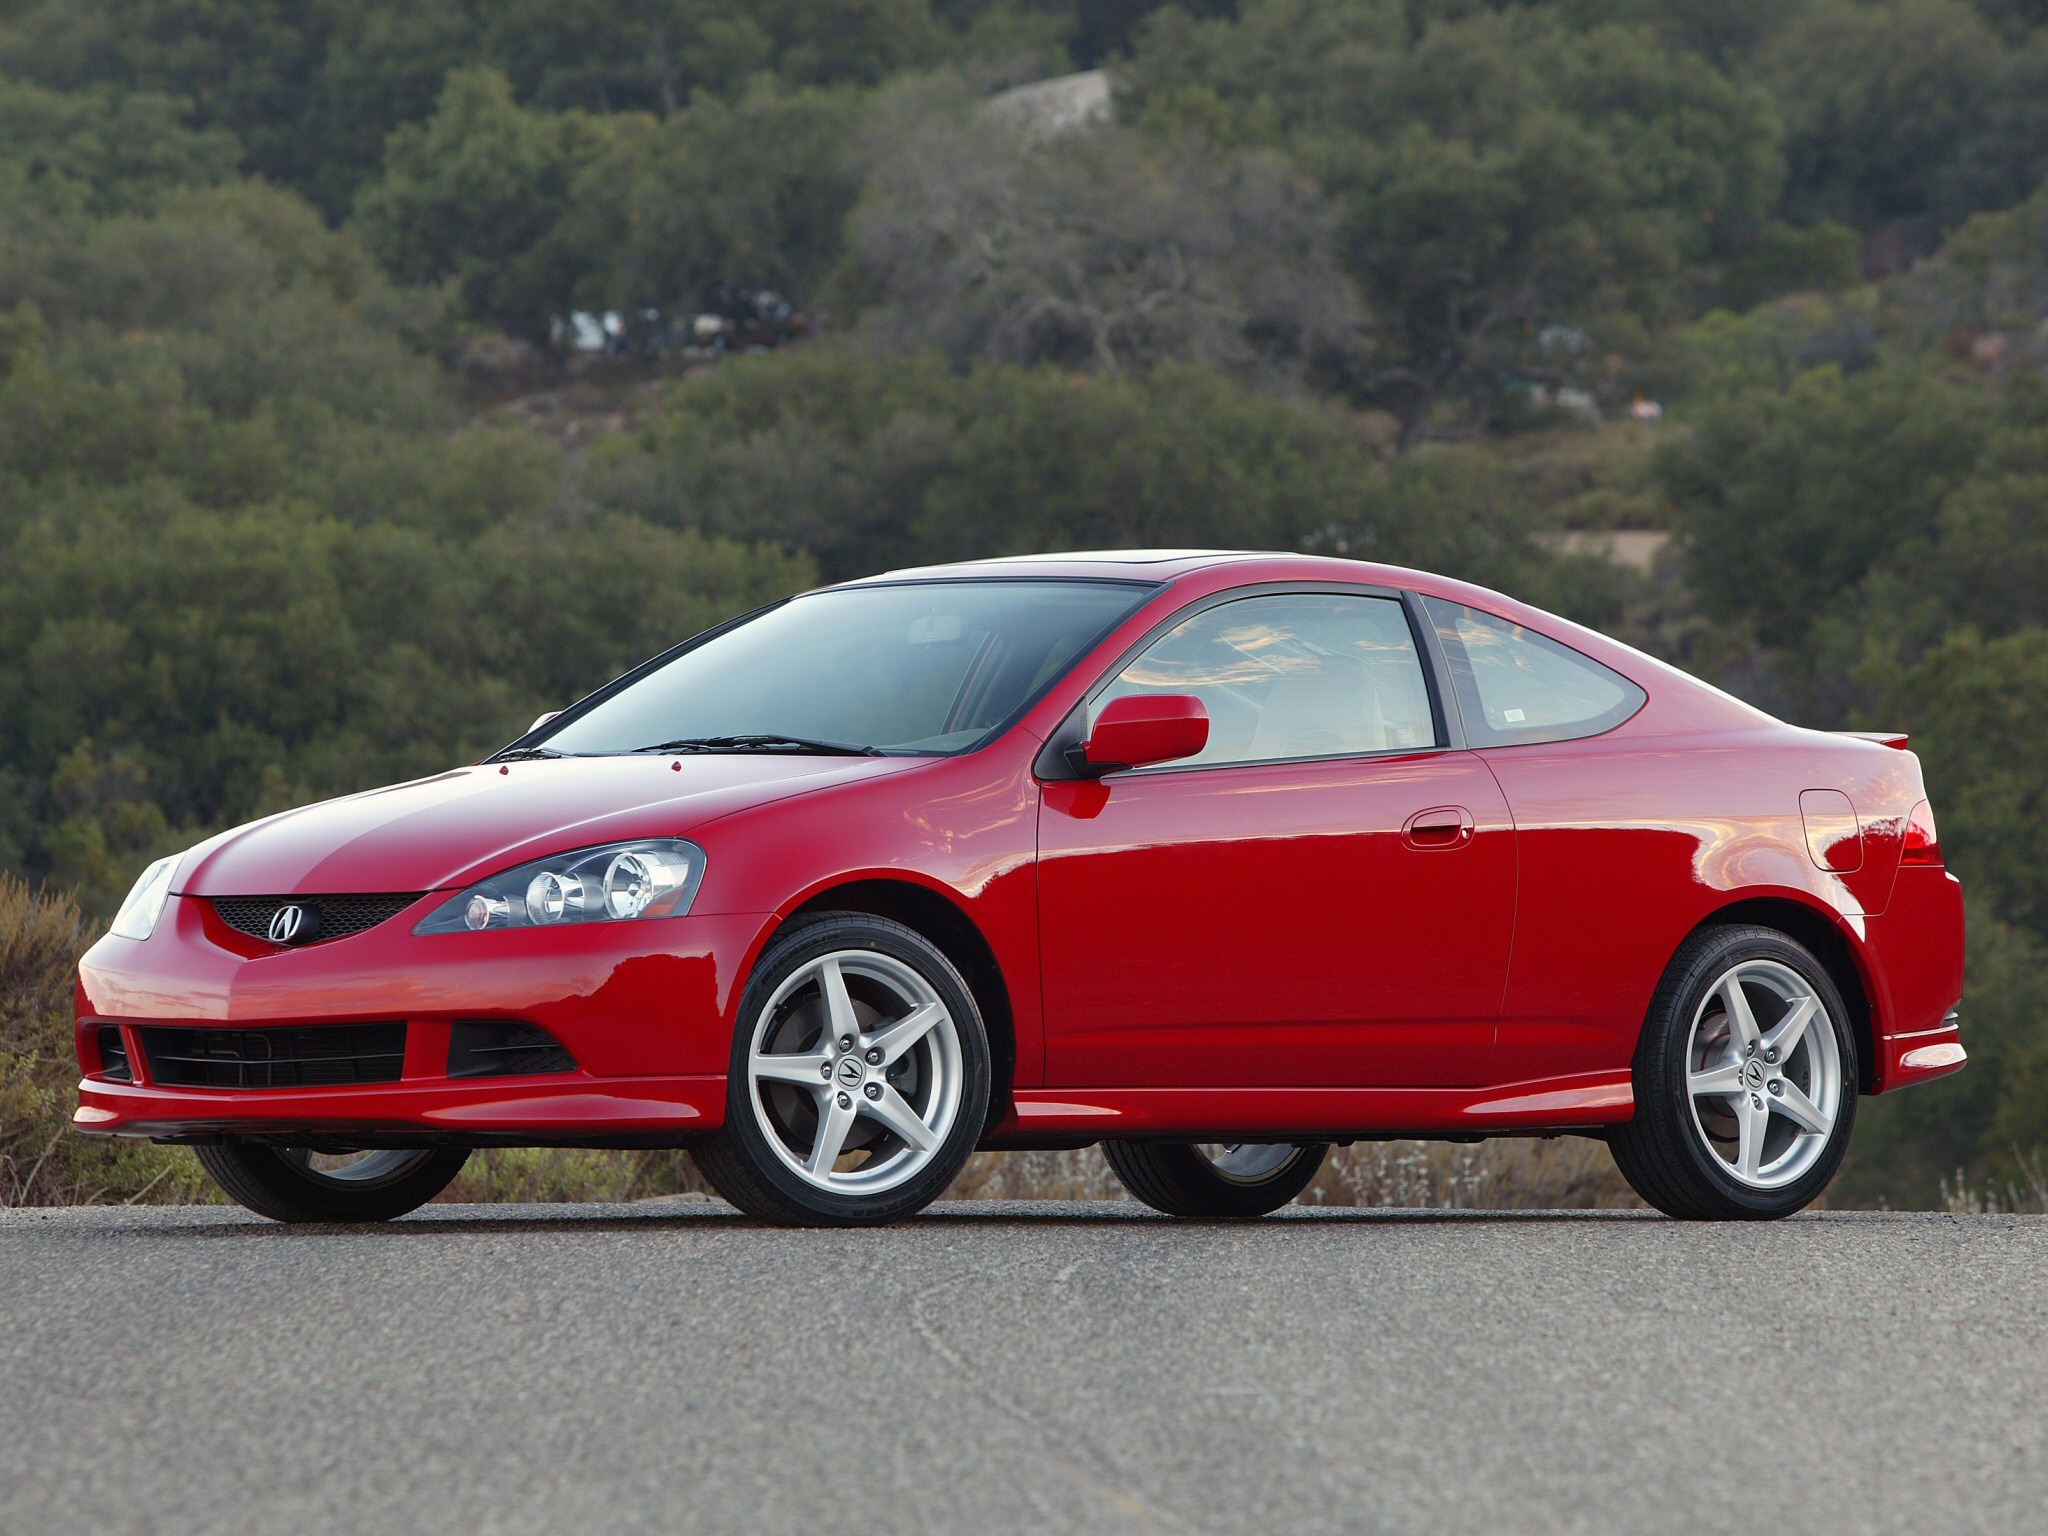 Free HD auto, nature, trees, acura, cars, red, asphalt, side view, style, rsx, akura